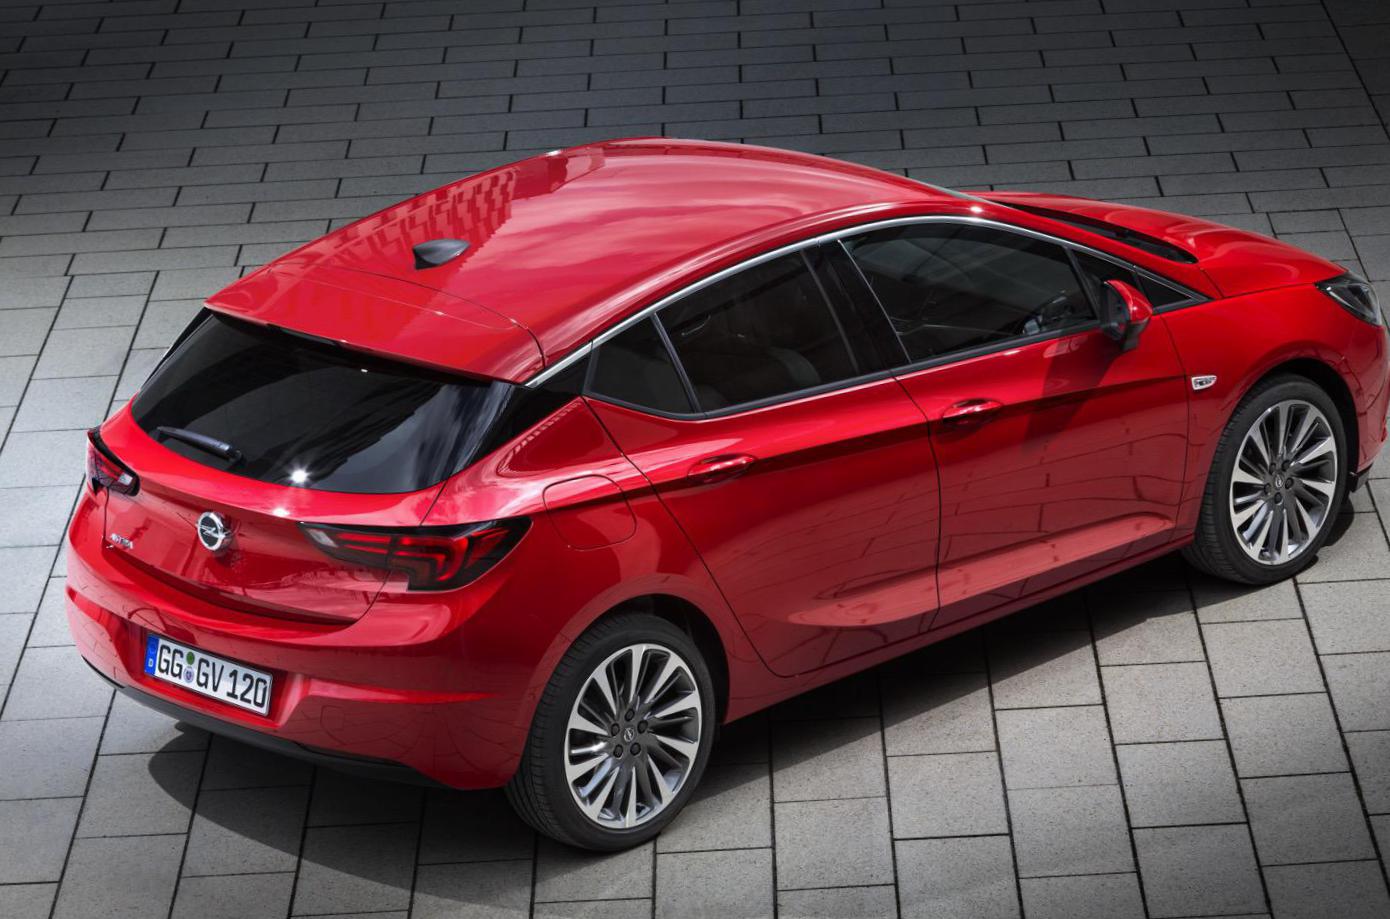 Astra K Hatchback Opel Specifications wagon